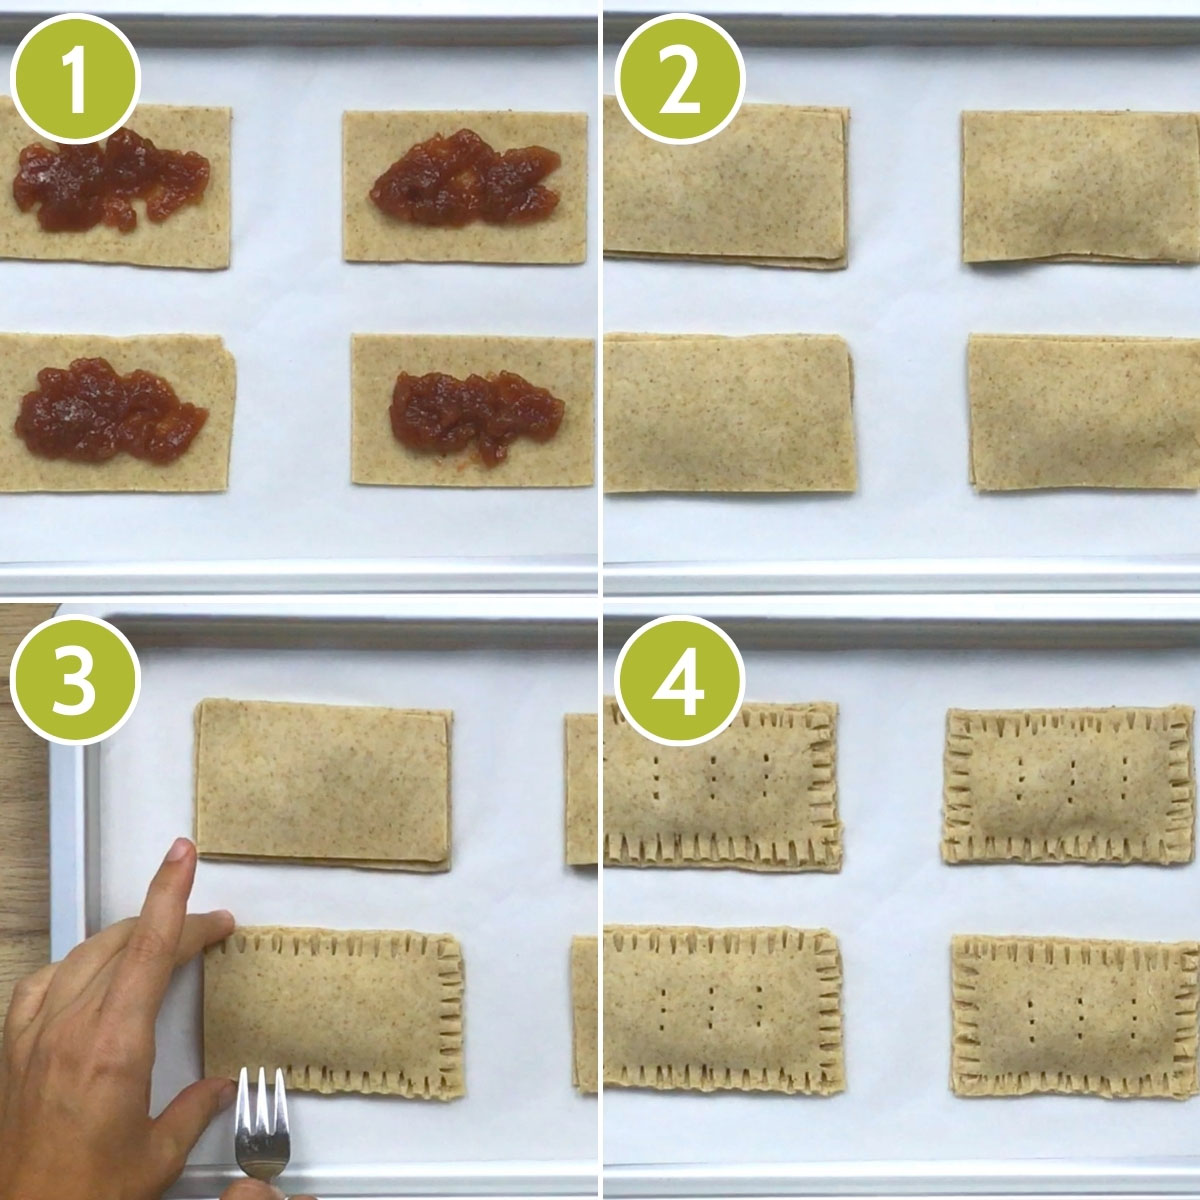 4 photo collage of how to fill gluten-free pop tarts by showing the cut-out rectangles with filling and a hand holding a fork sealing the edges